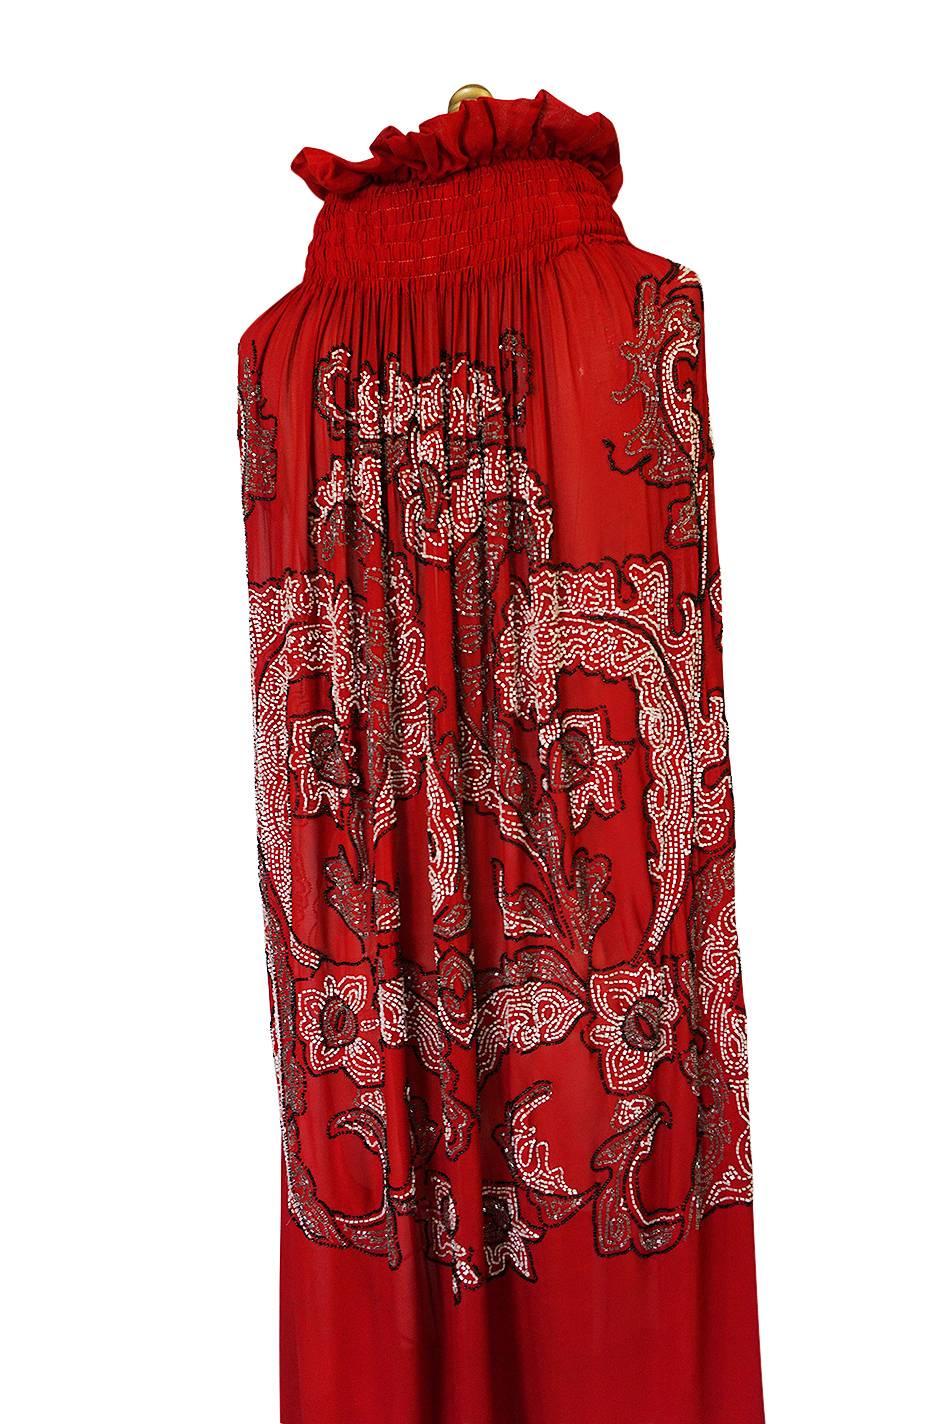 Women's 1920s House of Adair Densely Beaded Red Silk Cape